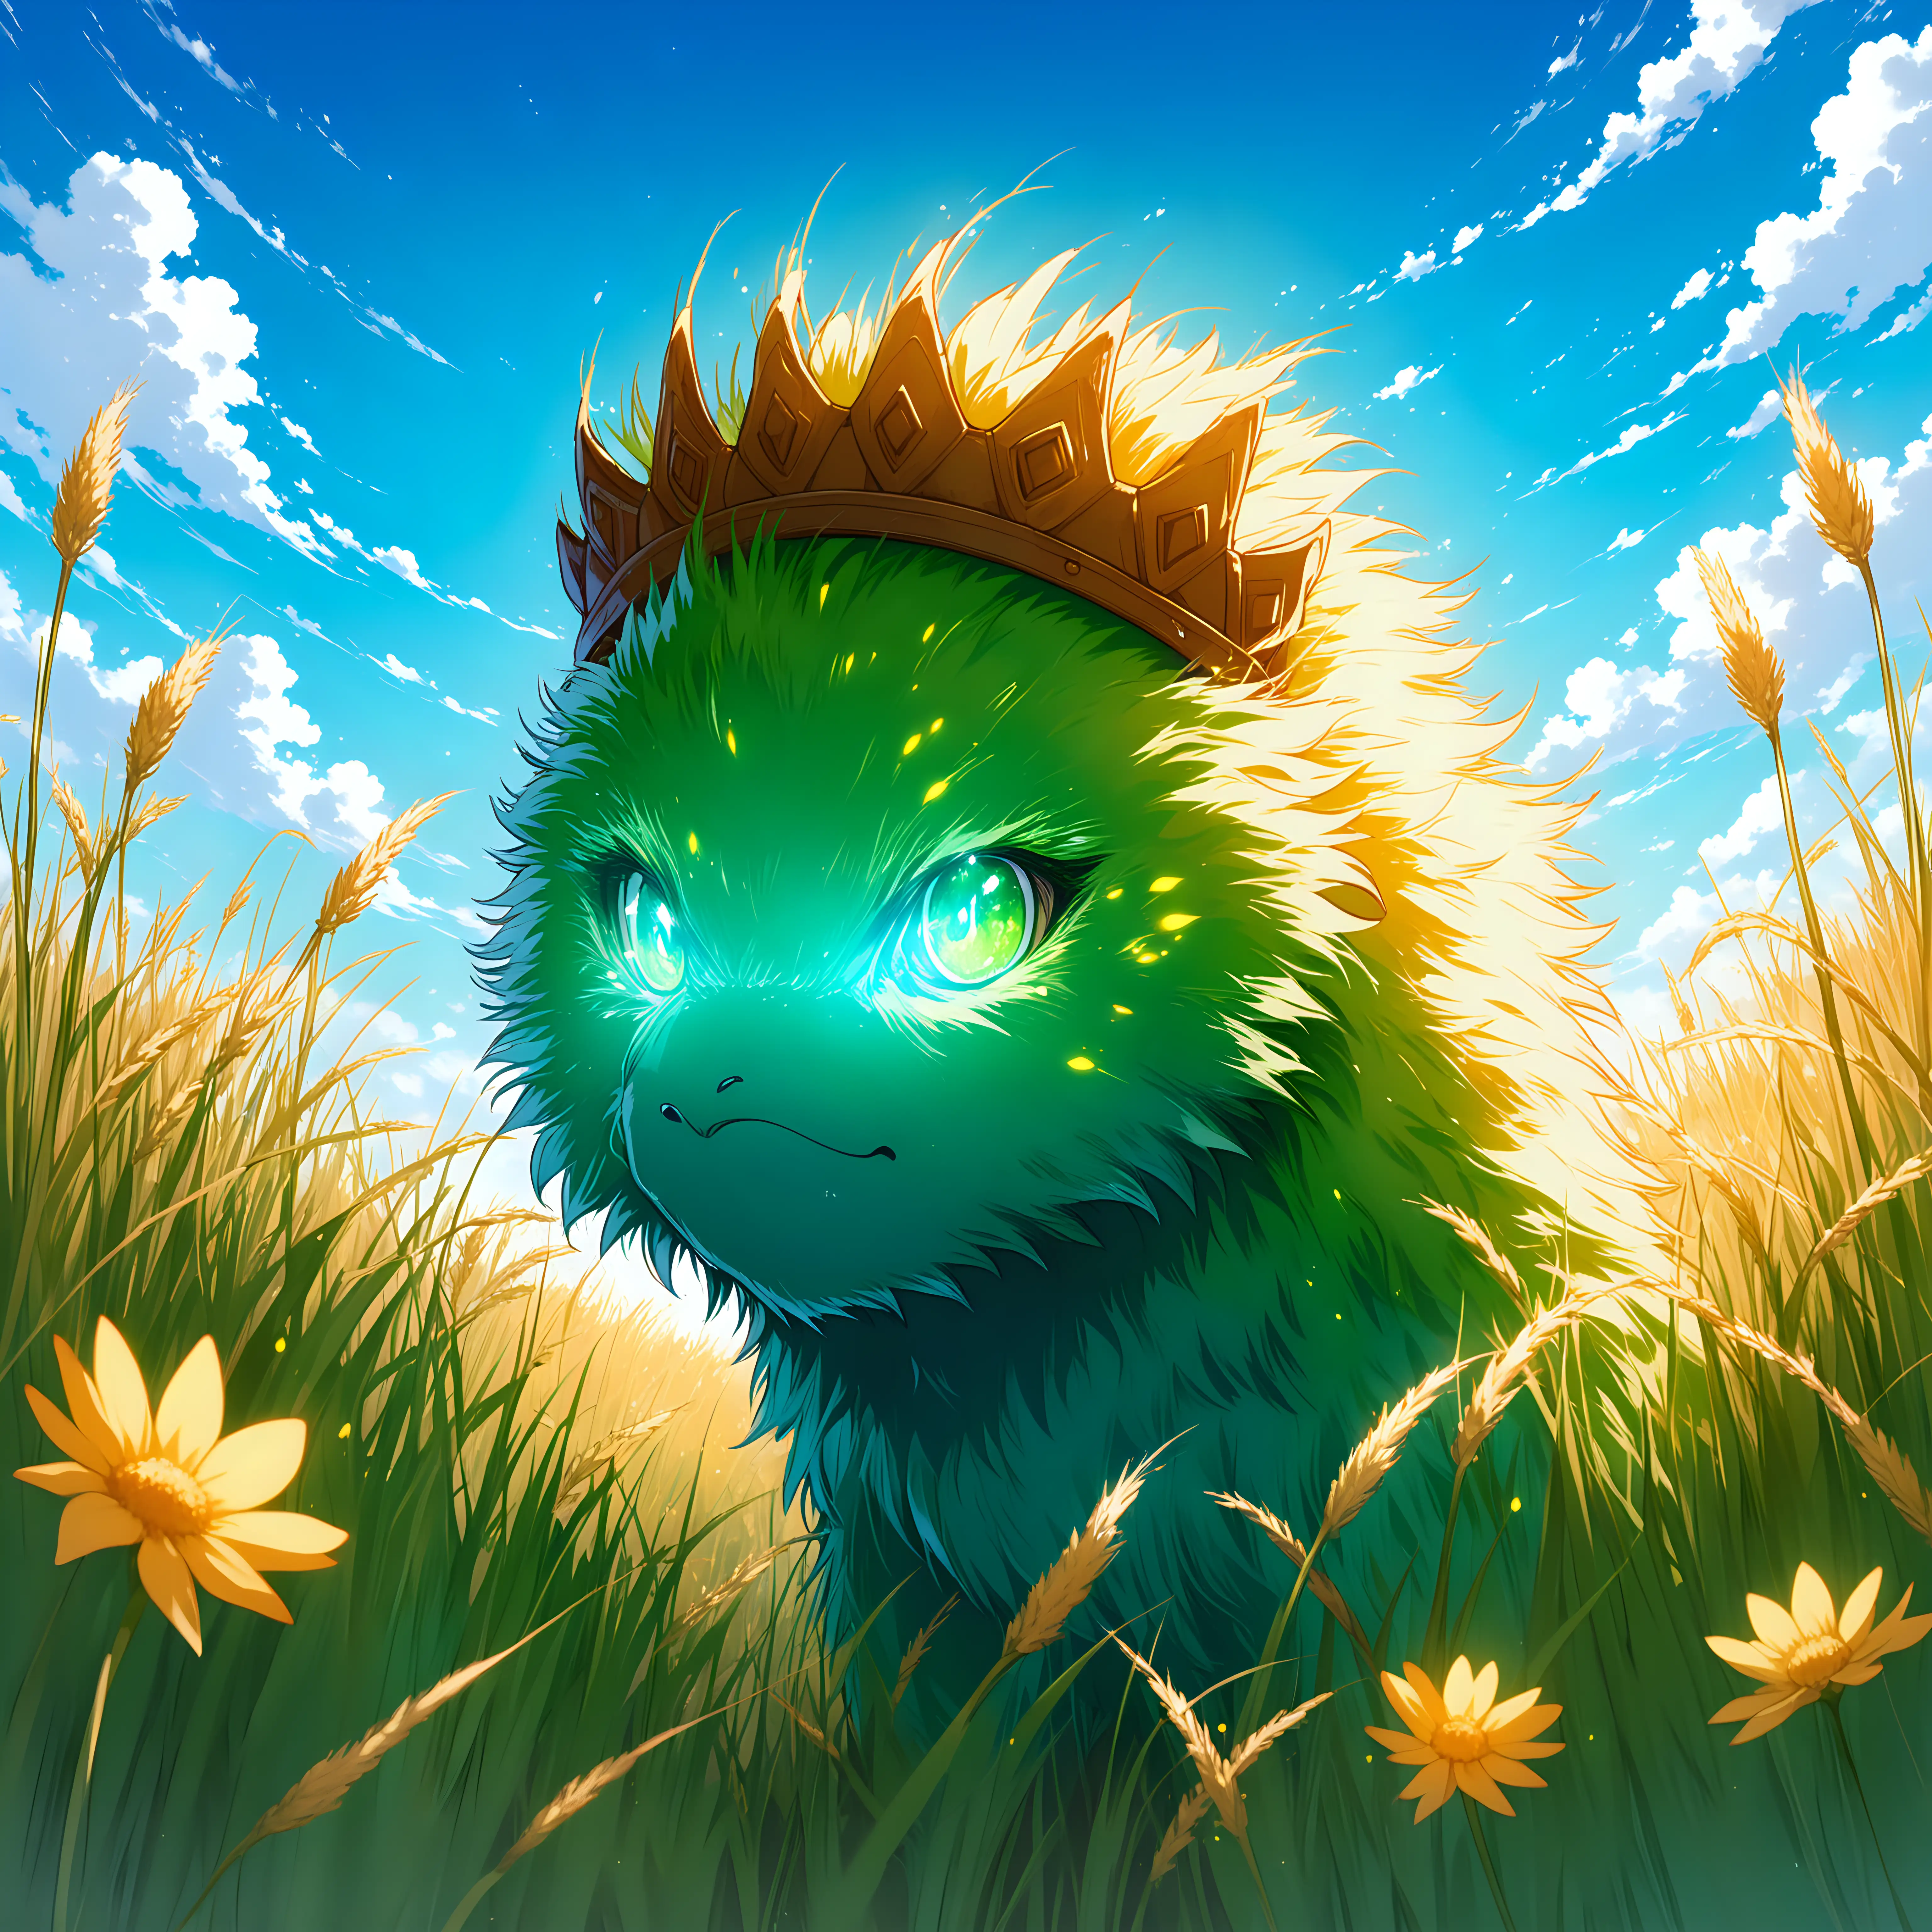 Fighting Anime Creature in Prairie with Grass Crown and Glowing Eyes